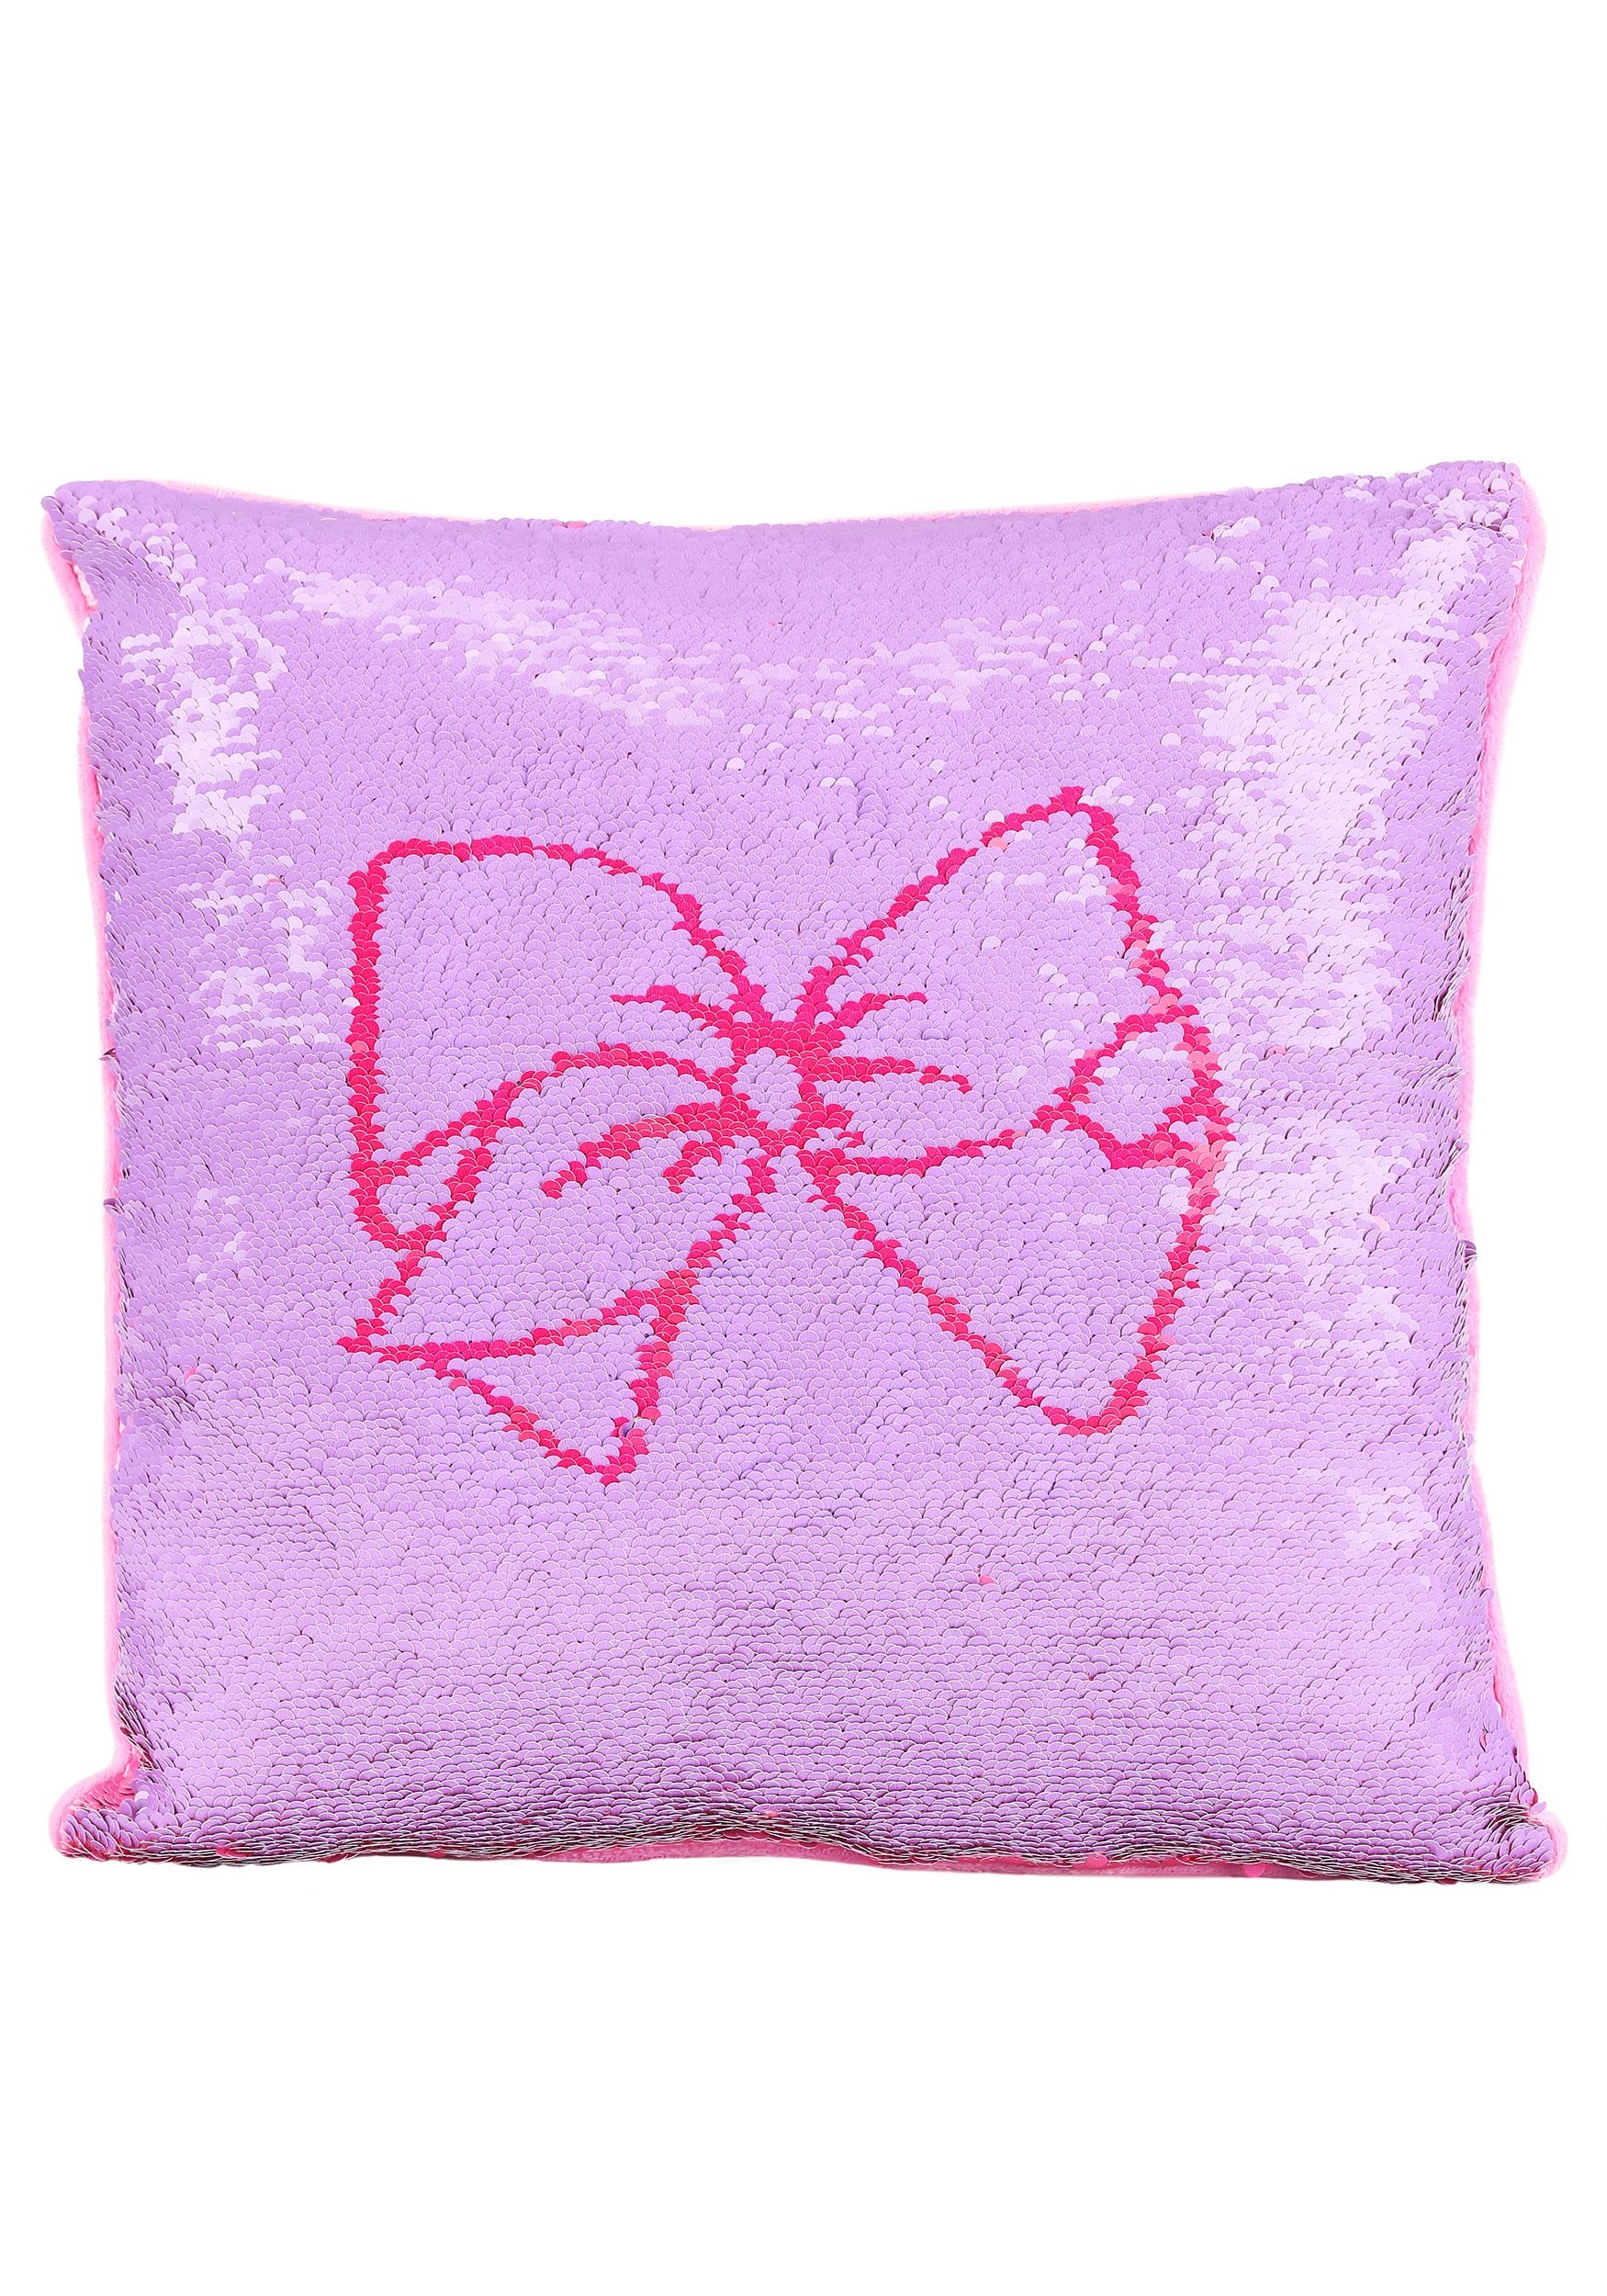 Details about   NICKELODEON JOJO SIWA SEQUIN PILLOW KEYCHAIN DONUT WHITE & PINK JUST AS PICTURED 